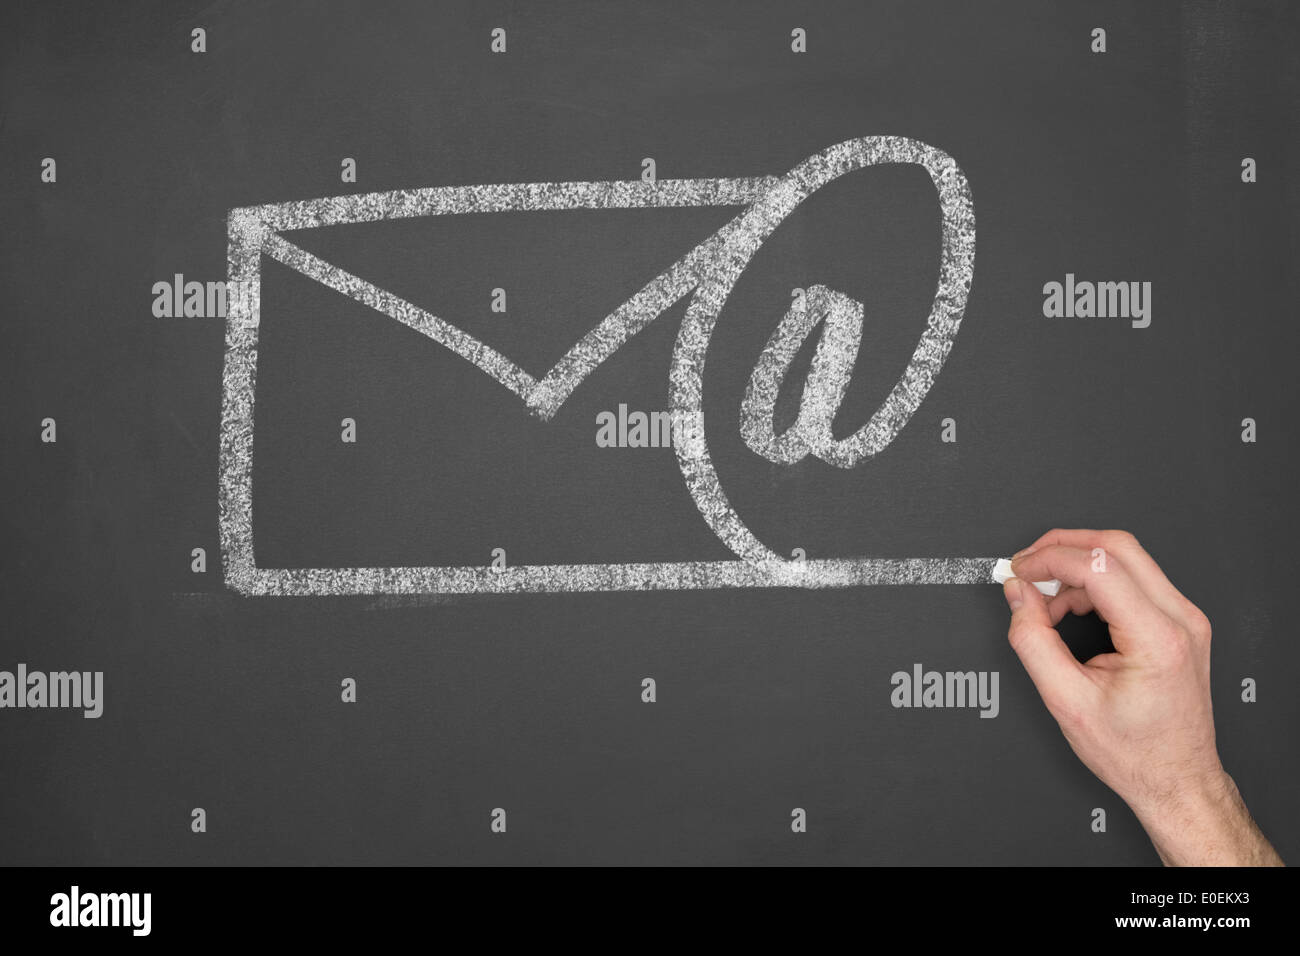 A businessman drawing an email symbol on a chalkboard. Stock Photo